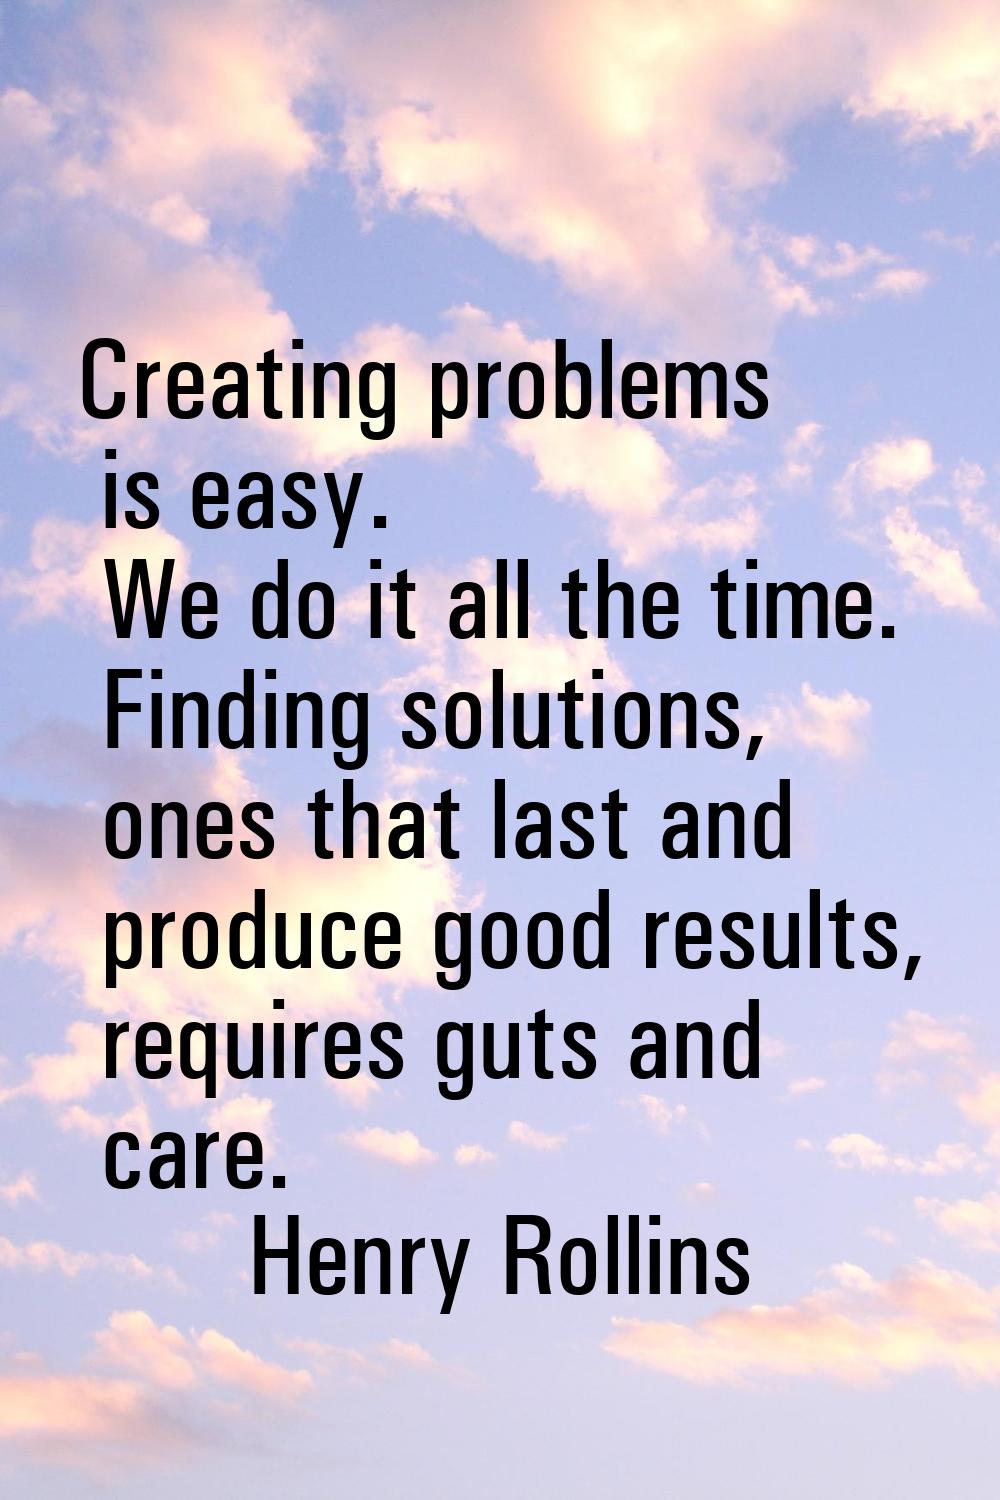 Creating problems is easy. We do it all the time. Finding solutions, ones that last and produce goo